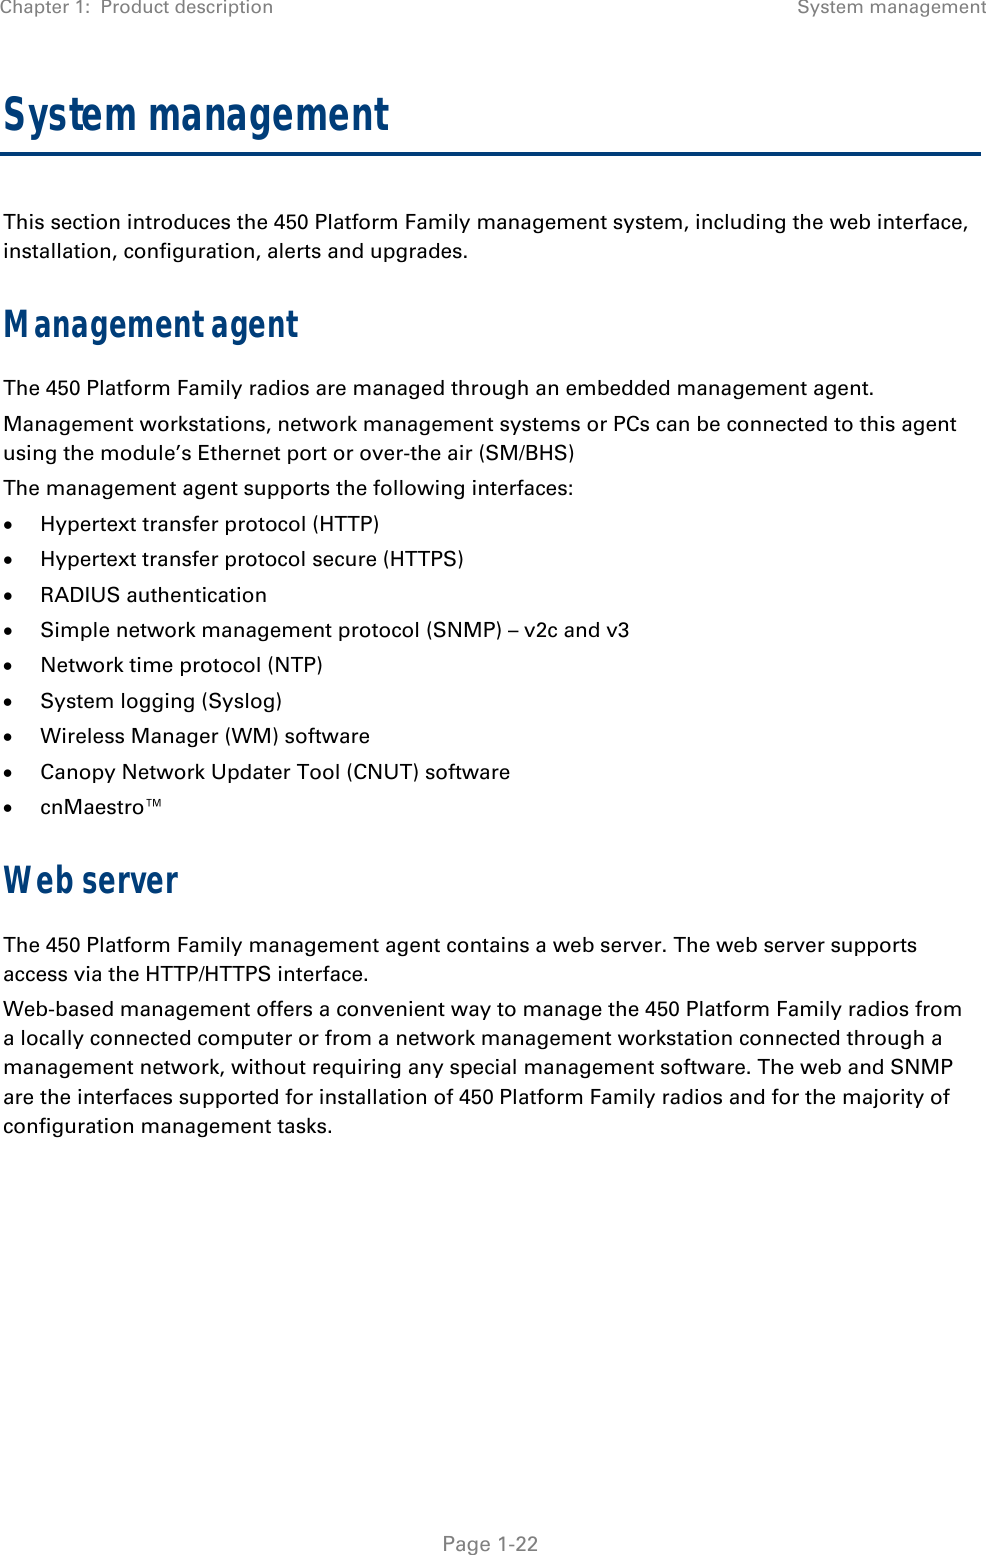 Chapter 1:  Product description System management   Page 1-22 System management This section introduces the 450 Platform Family management system, including the web interface, installation, configuration, alerts and upgrades. Management agent The 450 Platform Family radios are managed through an embedded management agent.  Management workstations, network management systems or PCs can be connected to this agent using the module’s Ethernet port or over-the air (SM/BHS)  The management agent supports the following interfaces:   Hypertext transfer protocol (HTTP)   Hypertext transfer protocol secure (HTTPS)  RADIUS authentication   Simple network management protocol (SNMP) – v2c and v3  Network time protocol (NTP)   System logging (Syslog)   Wireless Manager (WM) software   Canopy Network Updater Tool (CNUT) software   cnMaestro™ Web server The 450 Platform Family management agent contains a web server. The web server supports access via the HTTP/HTTPS interface. Web-based management offers a convenient way to manage the 450 Platform Family radios from a locally connected computer or from a network management workstation connected through a management network, without requiring any special management software. The web and SNMP are the interfaces supported for installation of 450 Platform Family radios and for the majority of  configuration management tasks.    